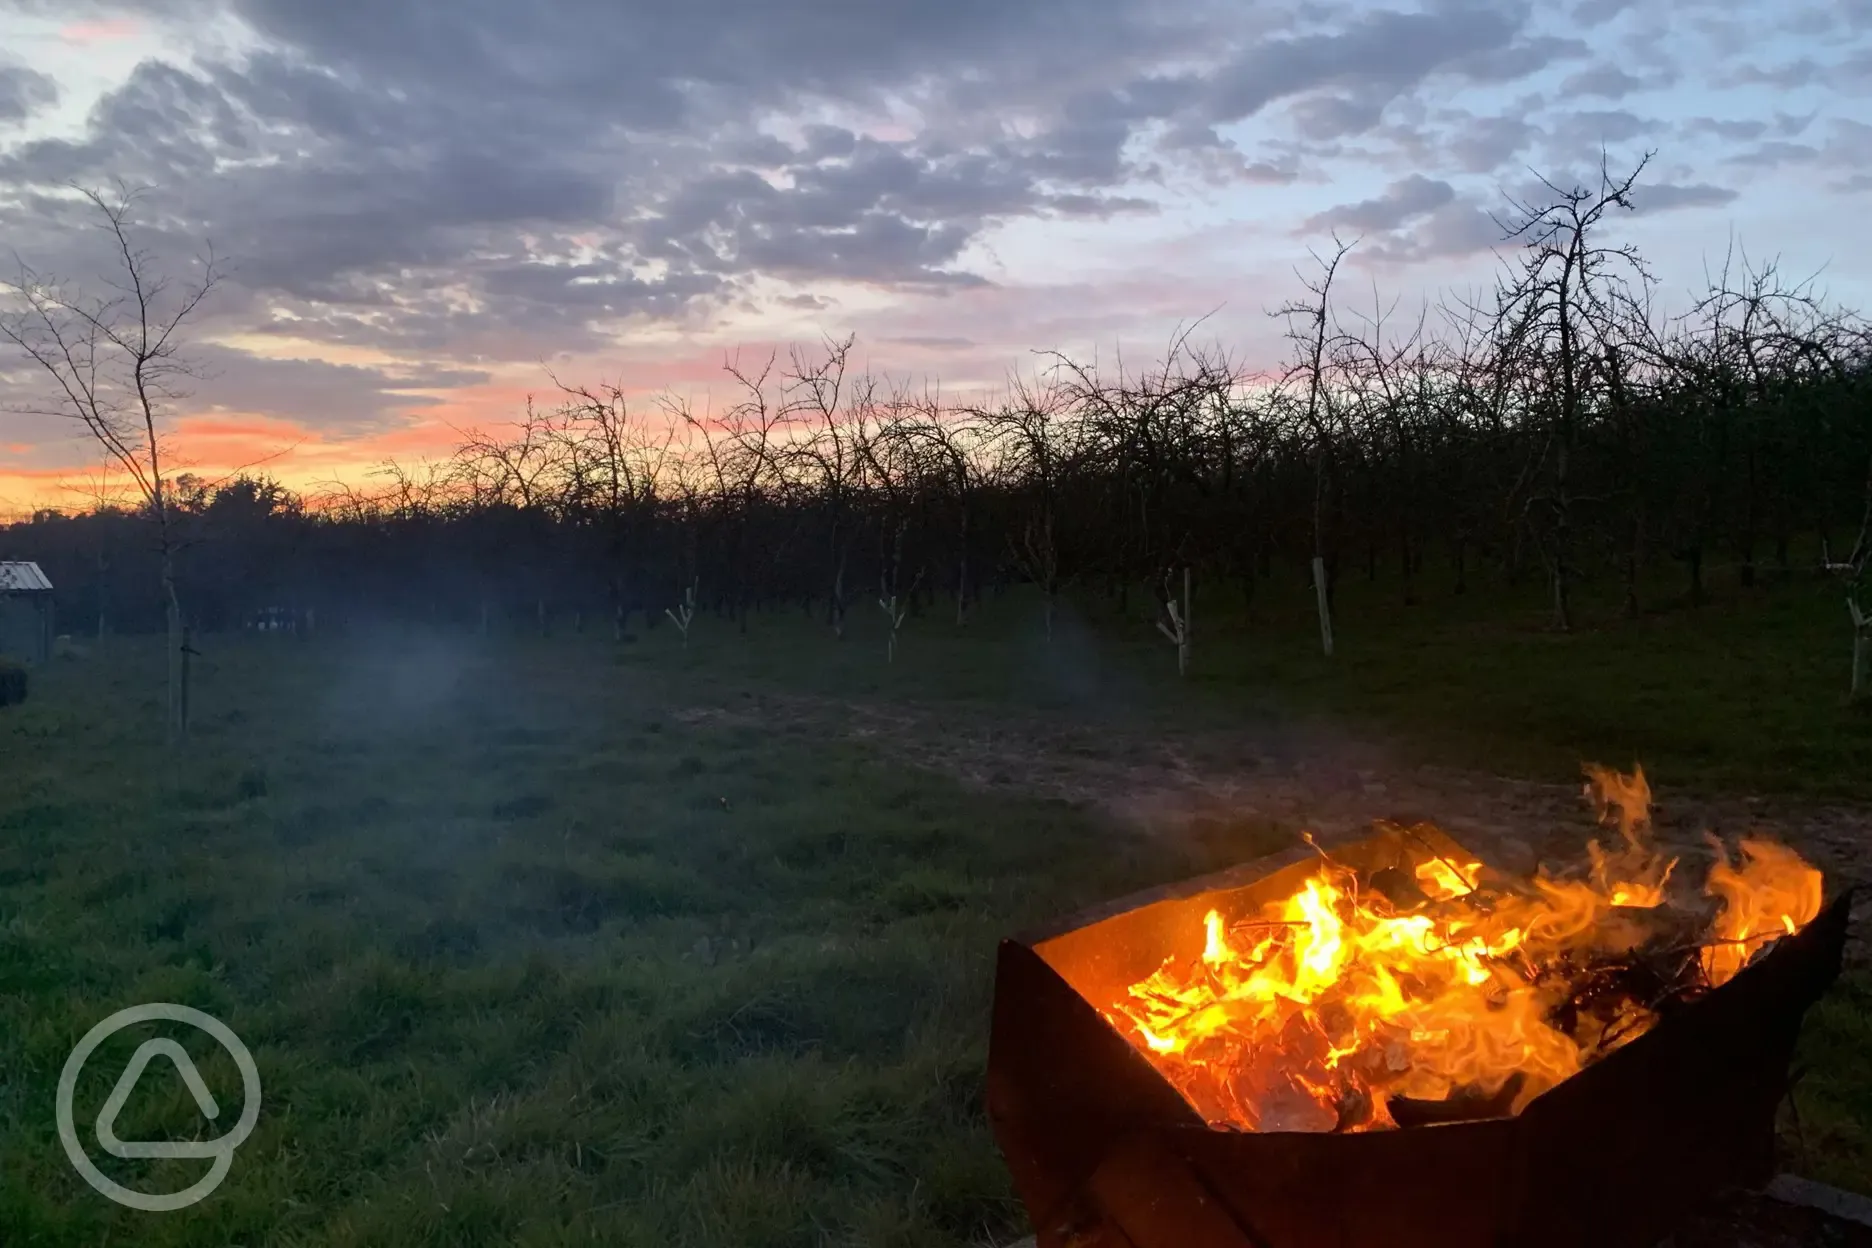 Evening sundowner in the orchard